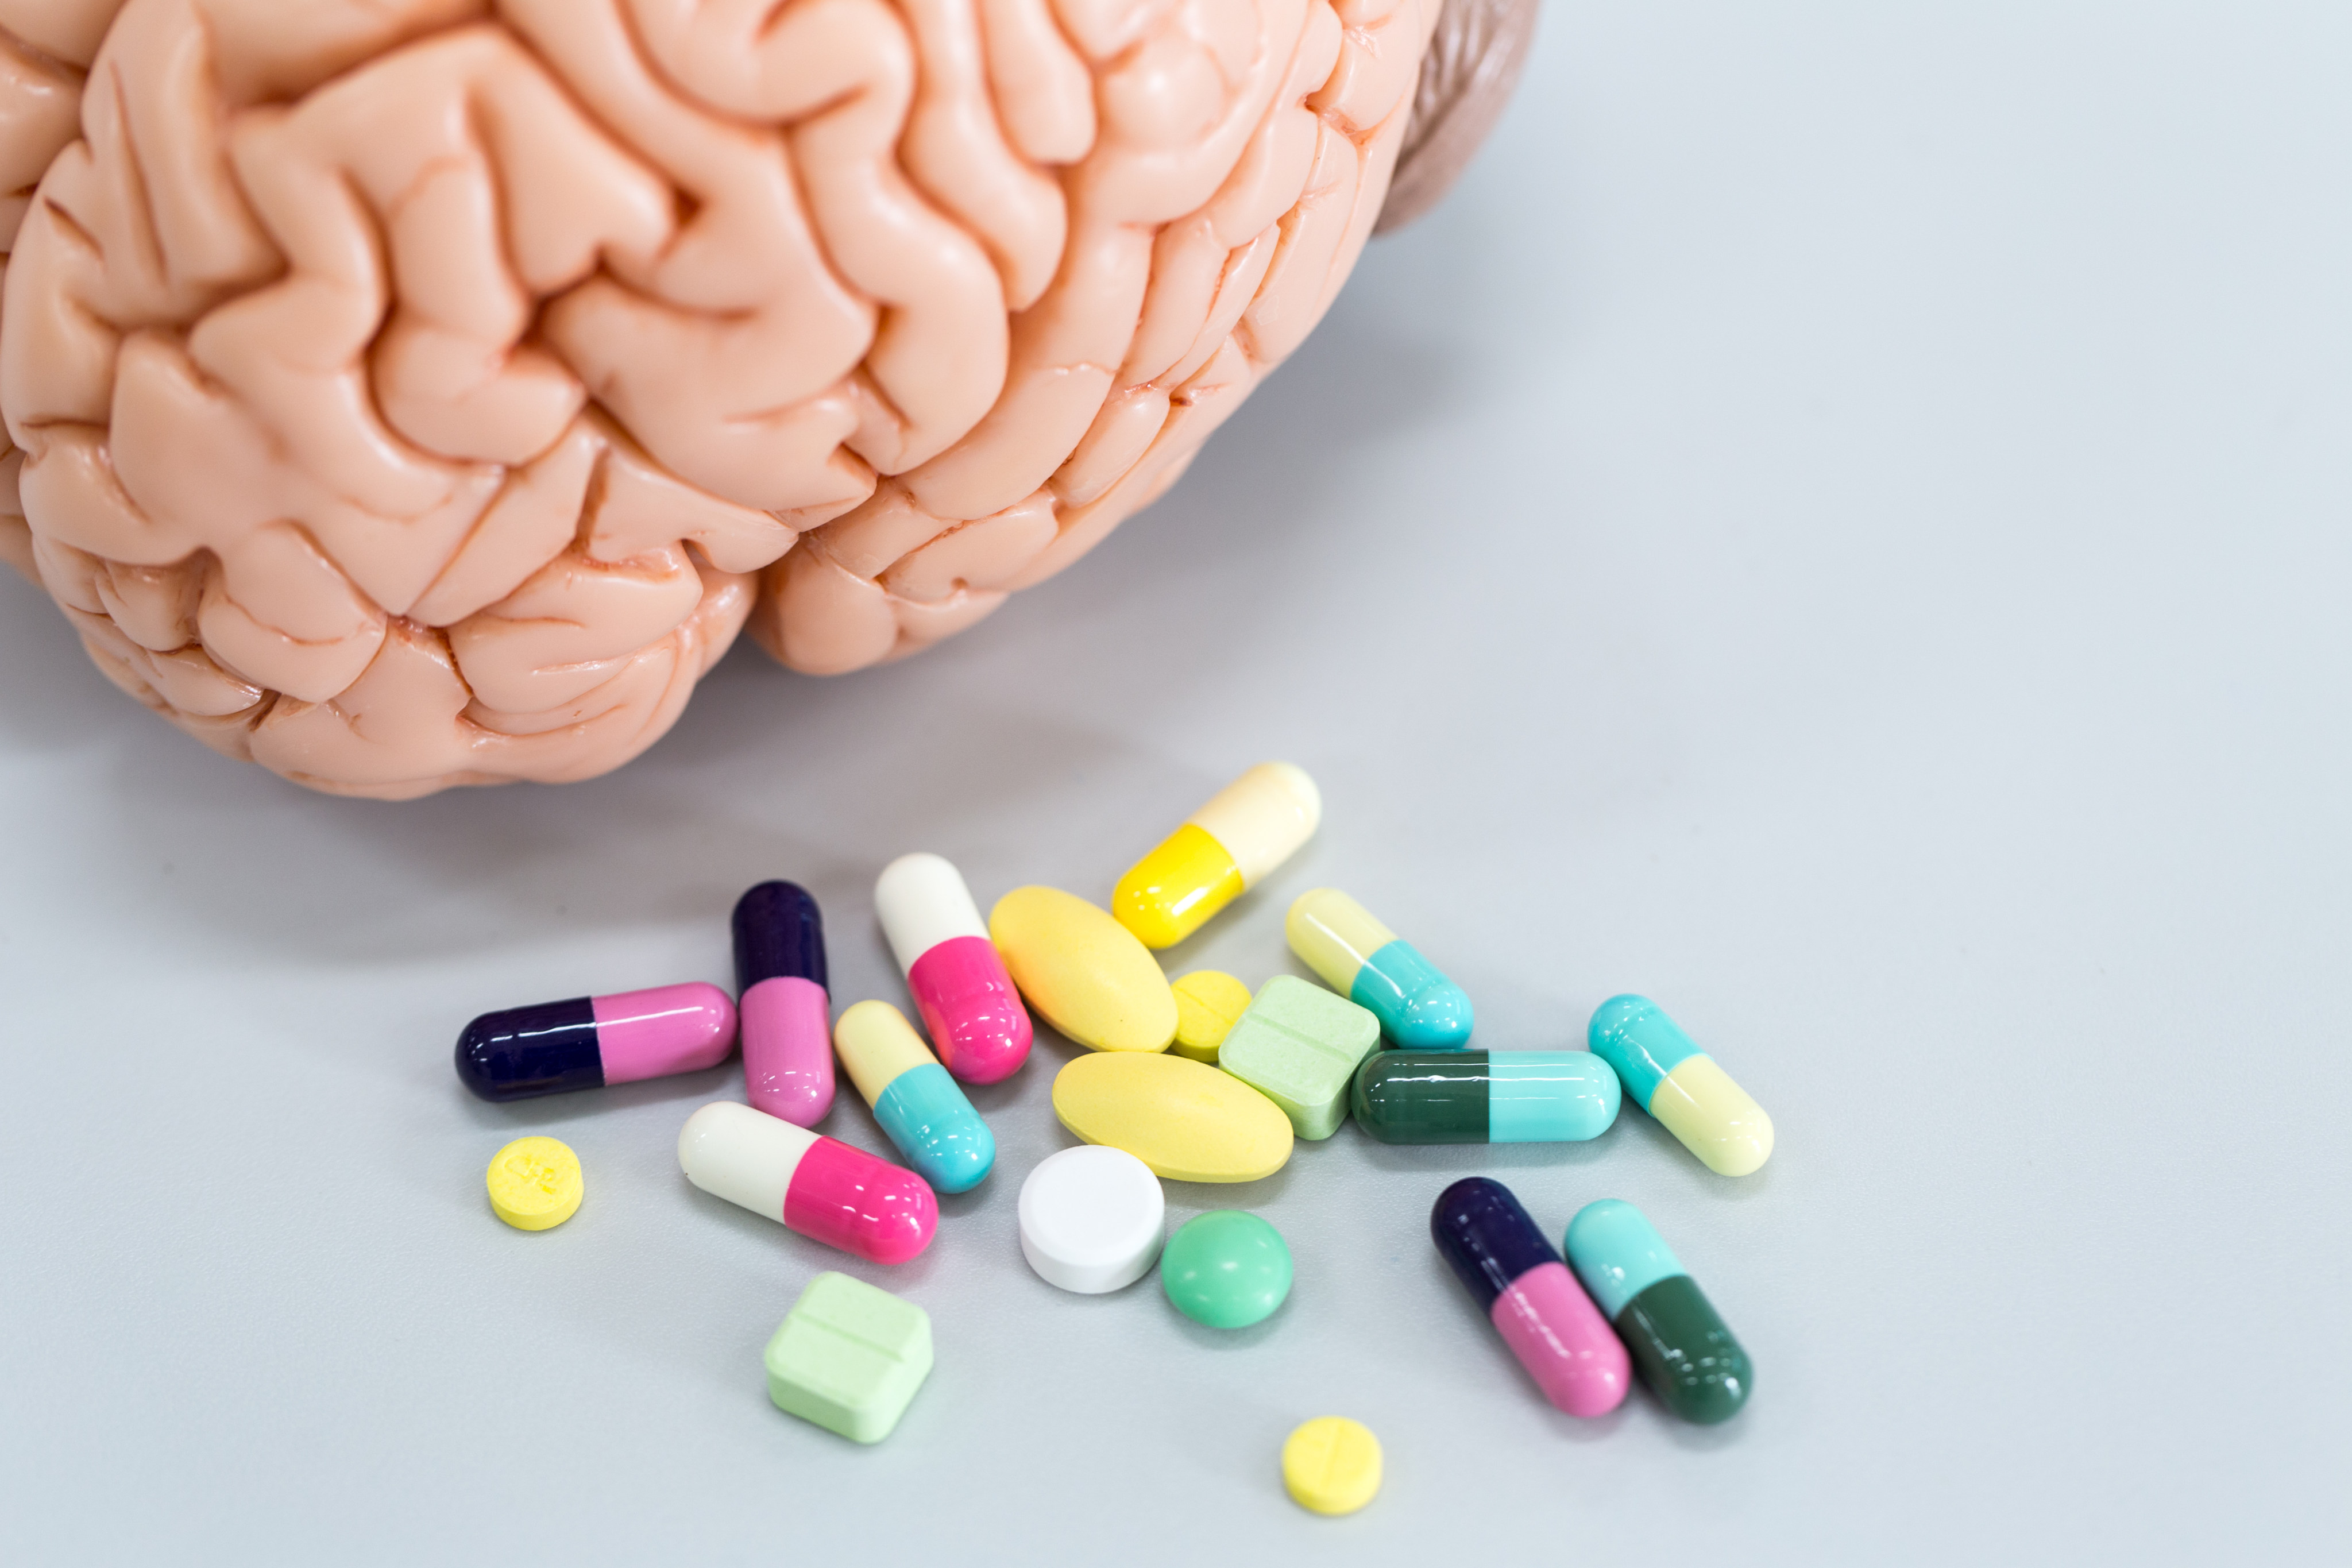 Brain model and medicine drug in laboratory. Photo: Shutterstock Images